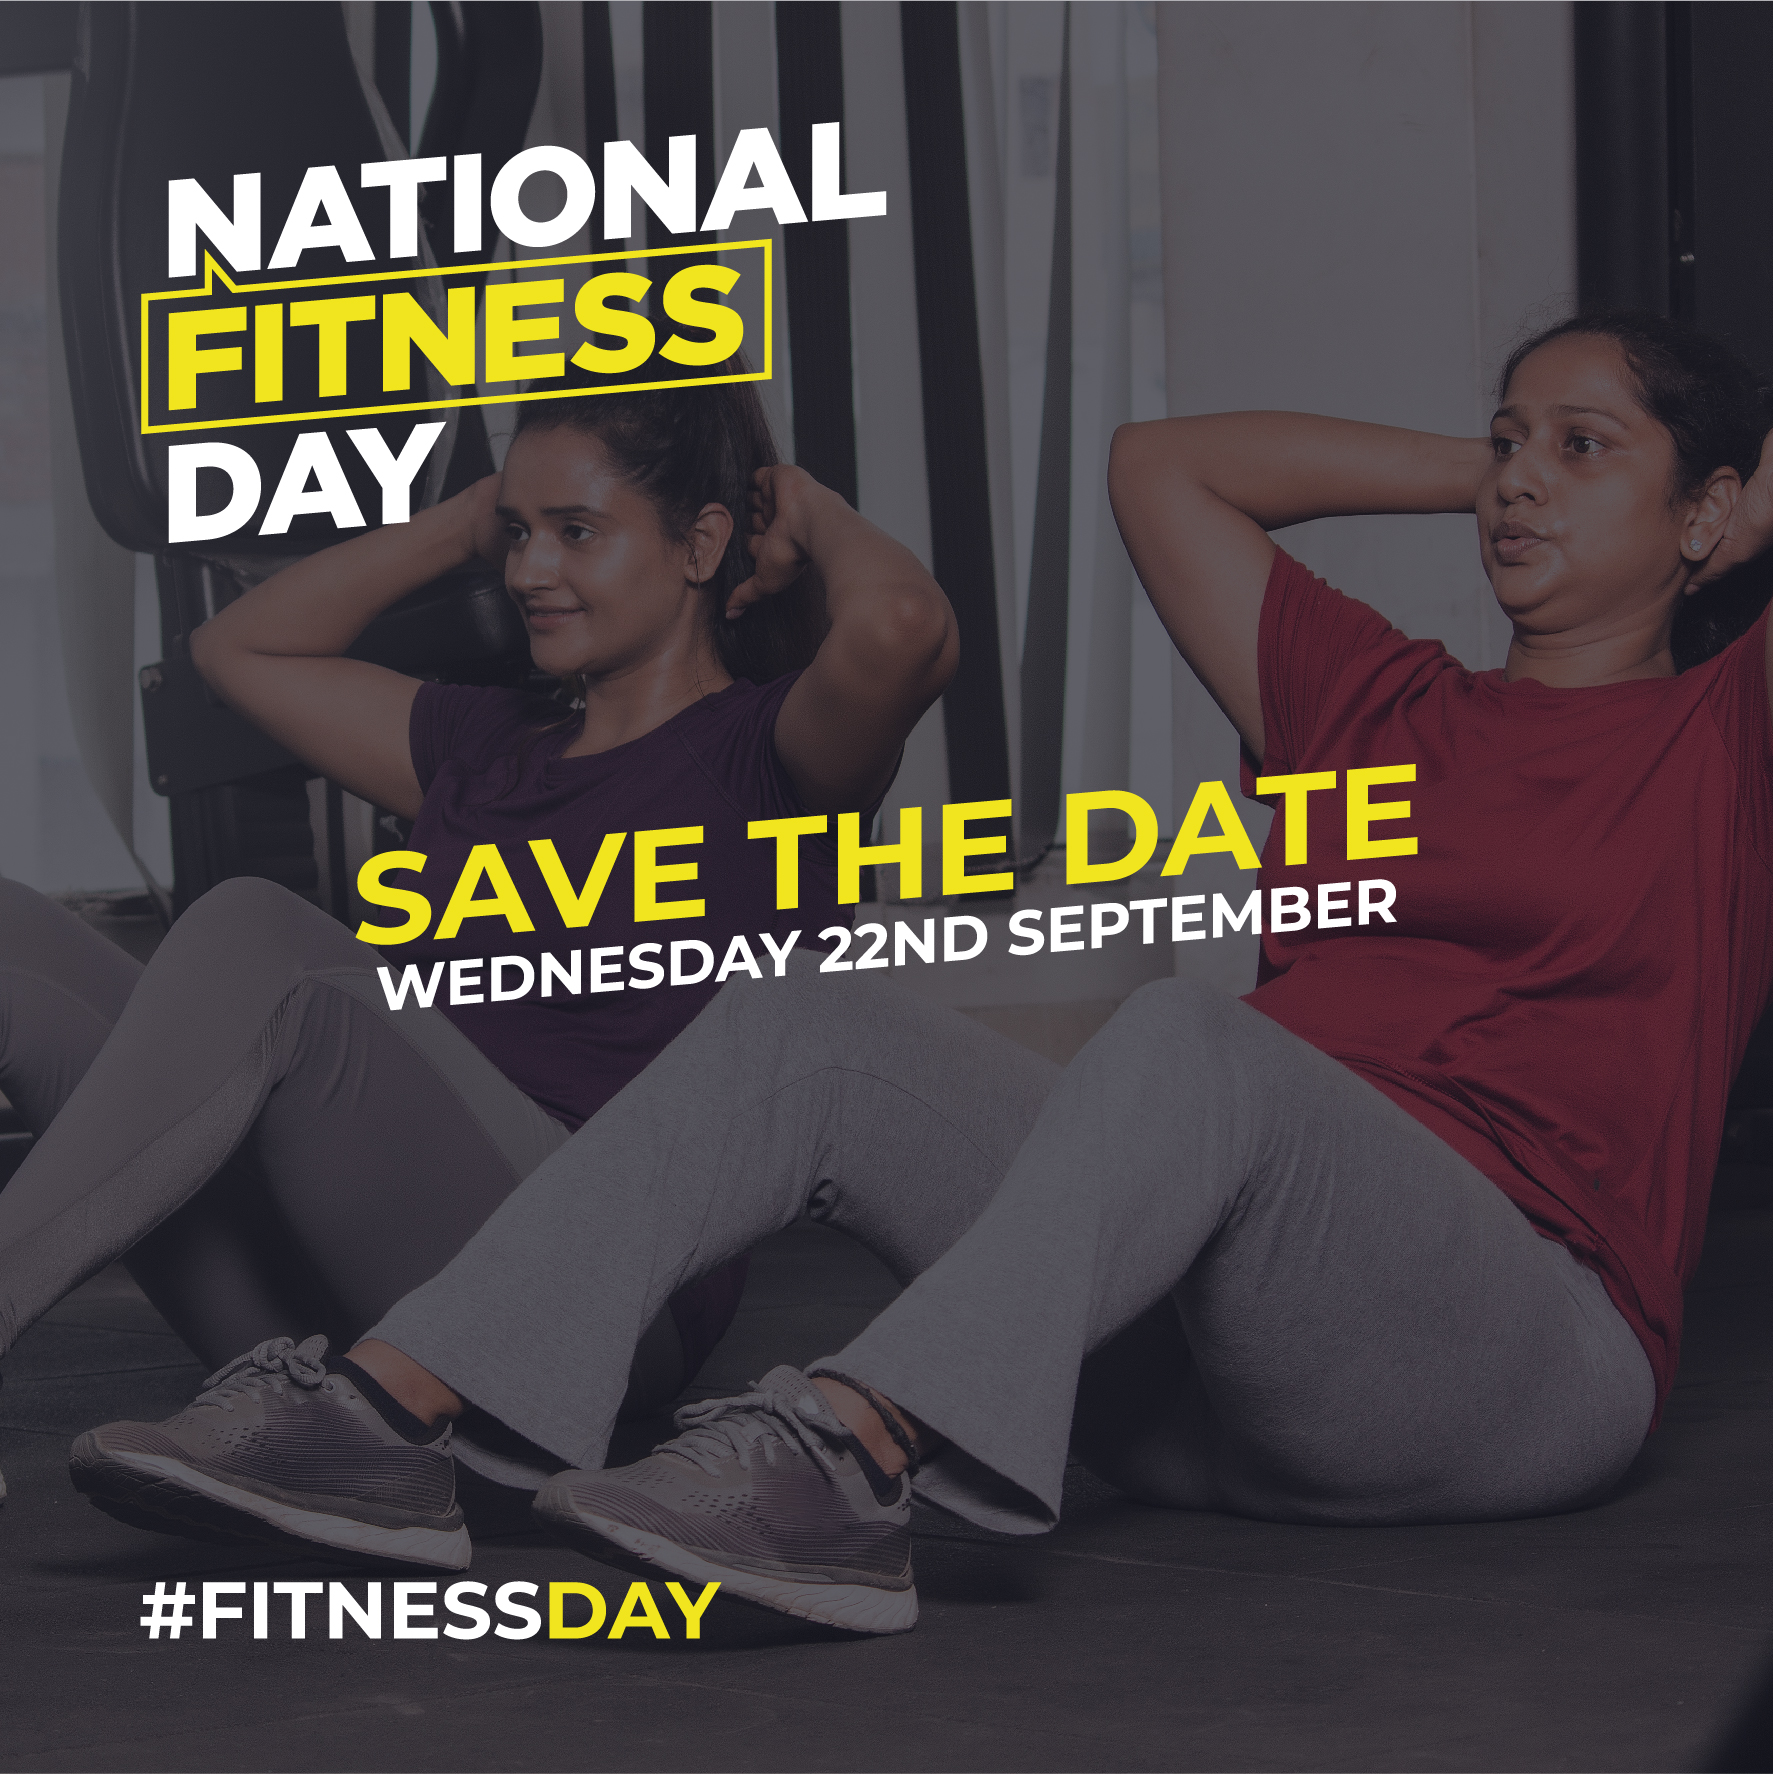 Everybody • Countdown to National Fitness Day has begun!